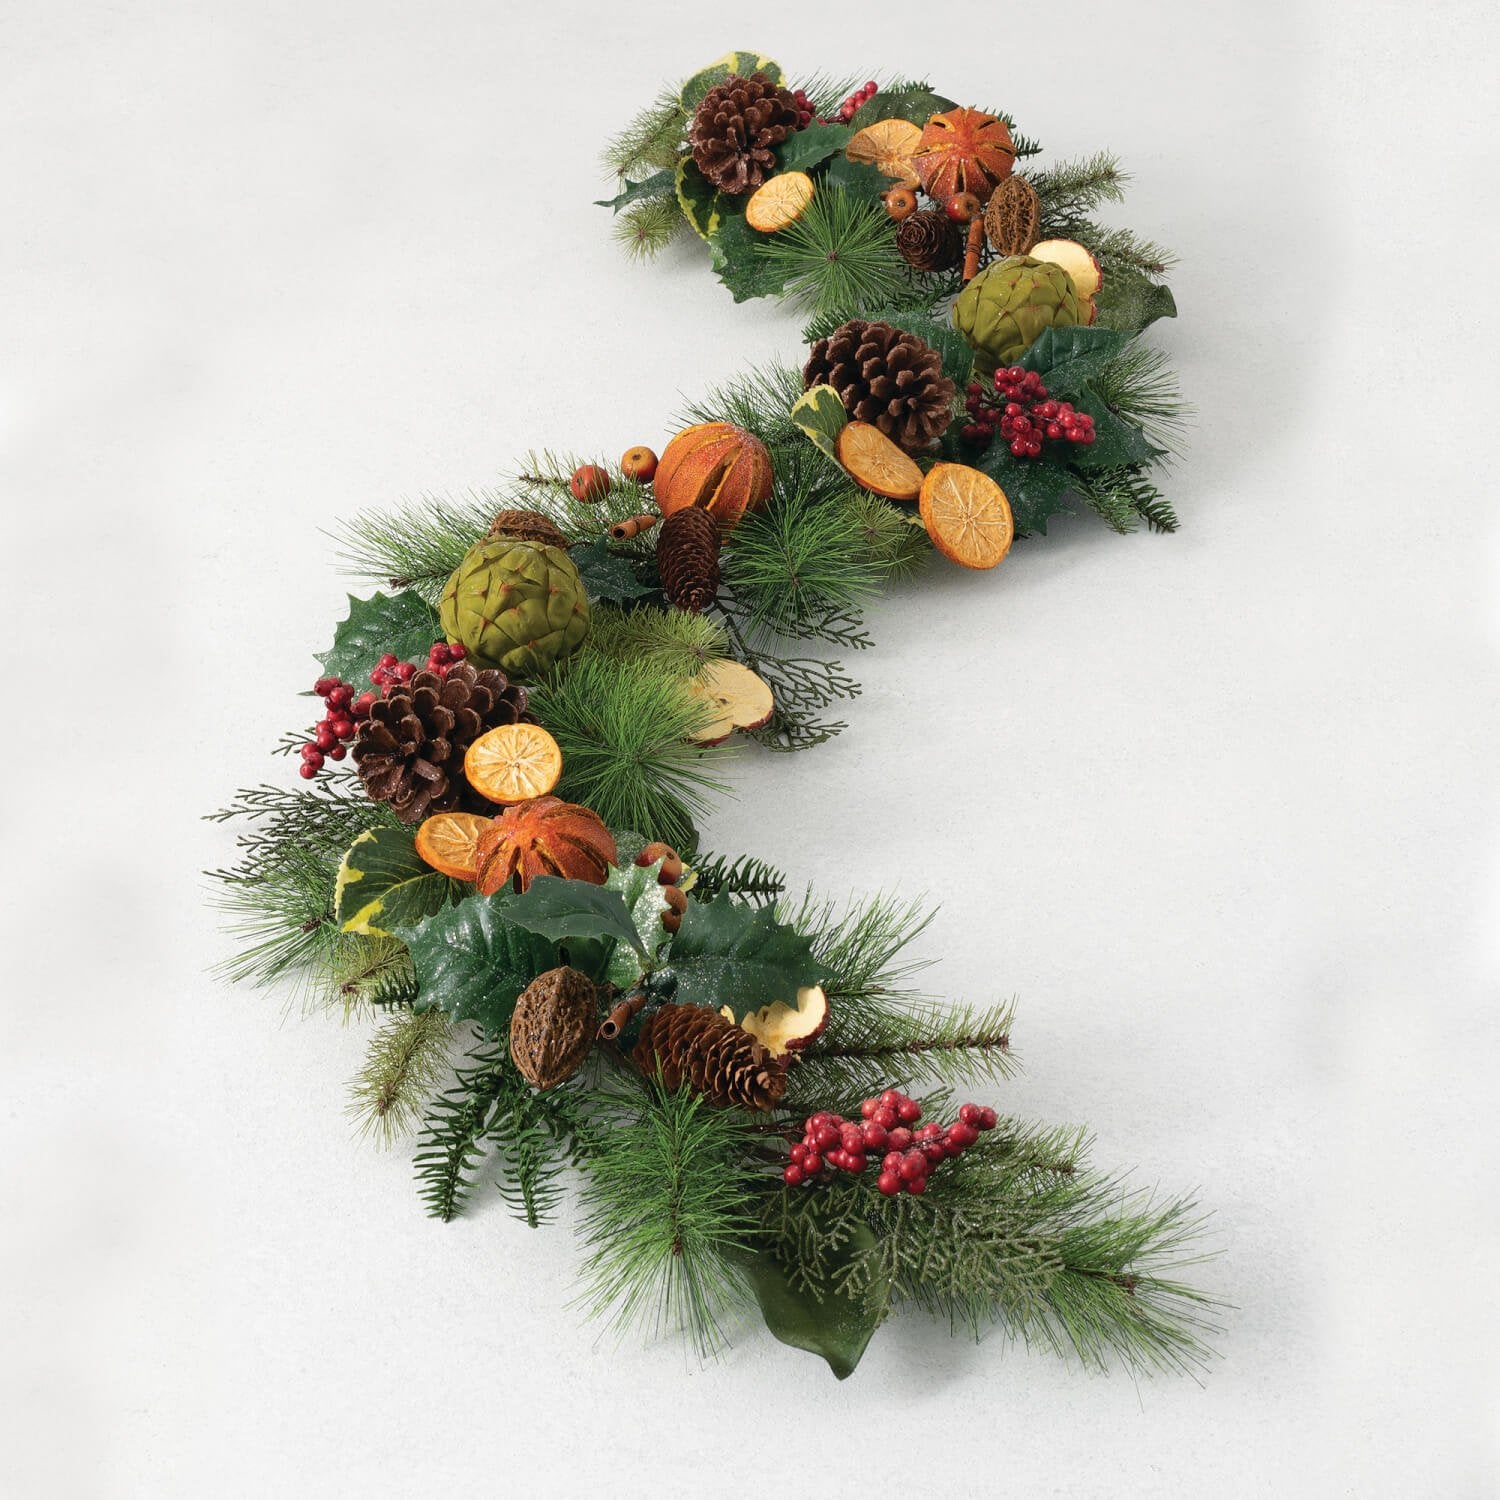 Colonial Christmas 6 ft&quot; Cedar, Pine, Apple and Orange Pomander Garland - The Primitive Pineapple Collection